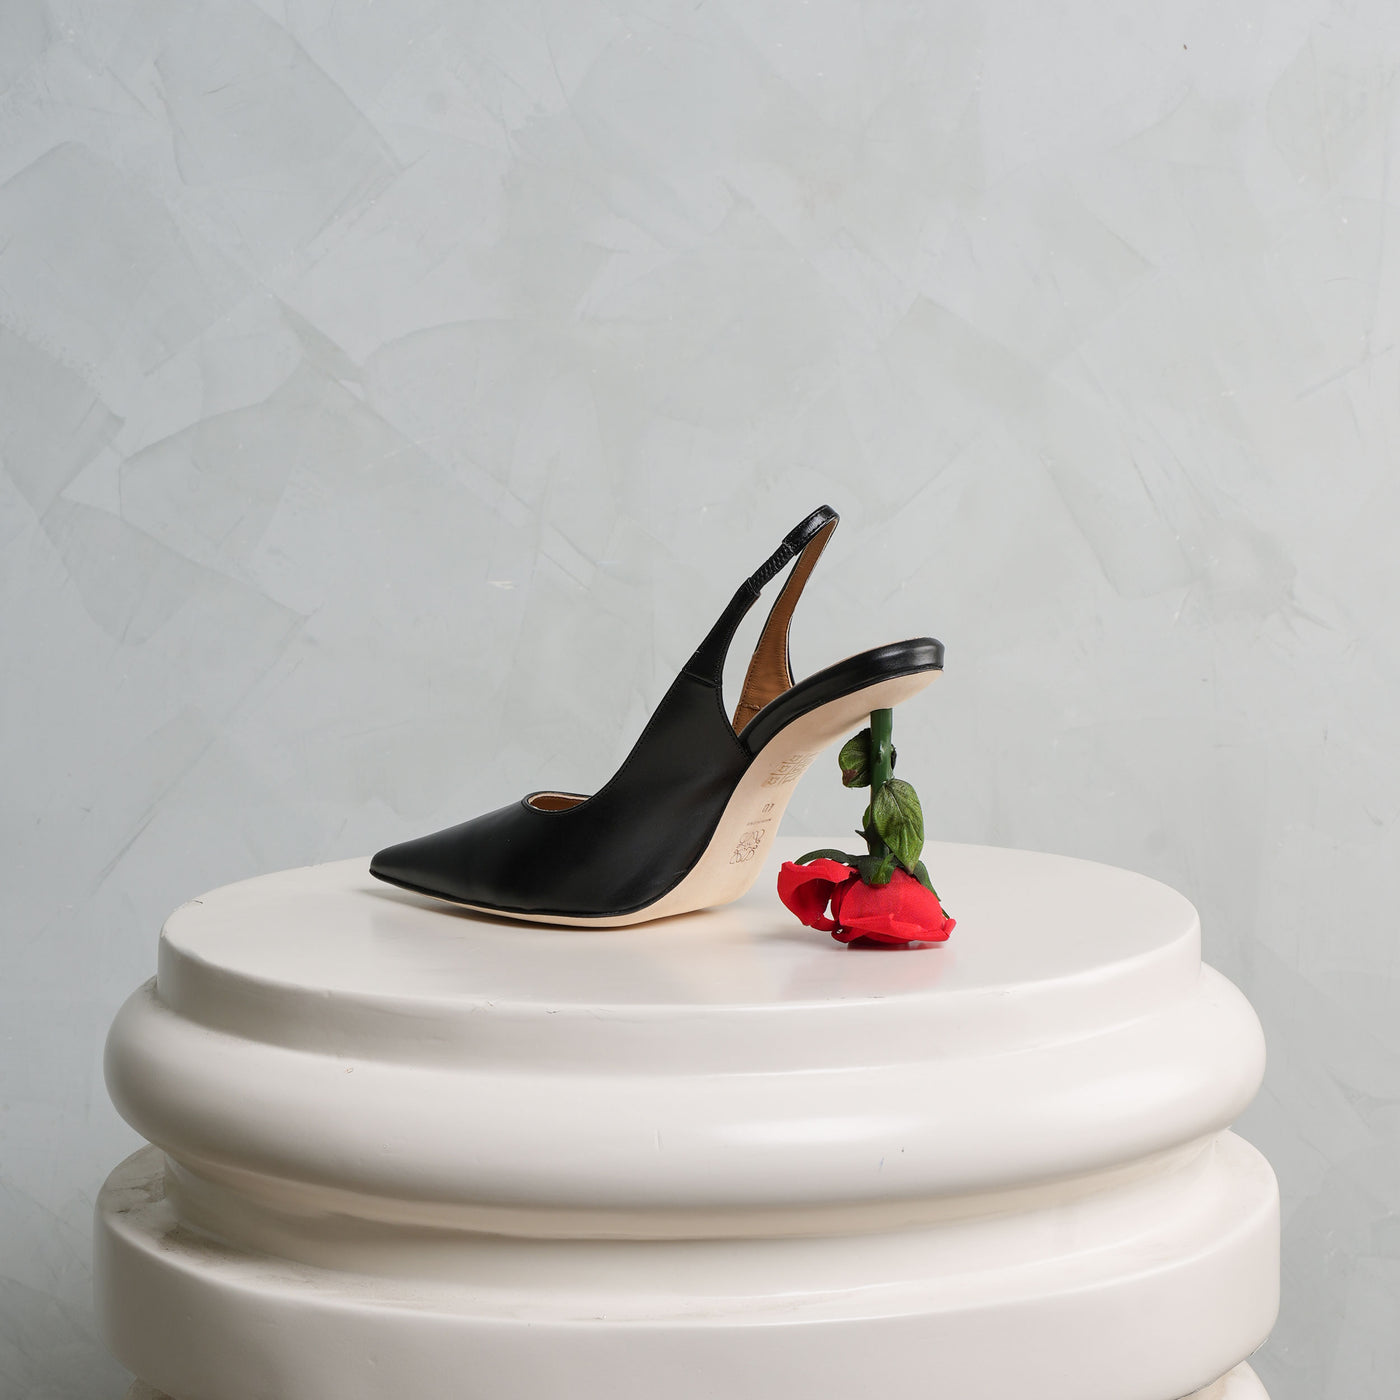 Loewe Rose Heel Slingback with  an objets trouvés rose heel with leaves and petals 